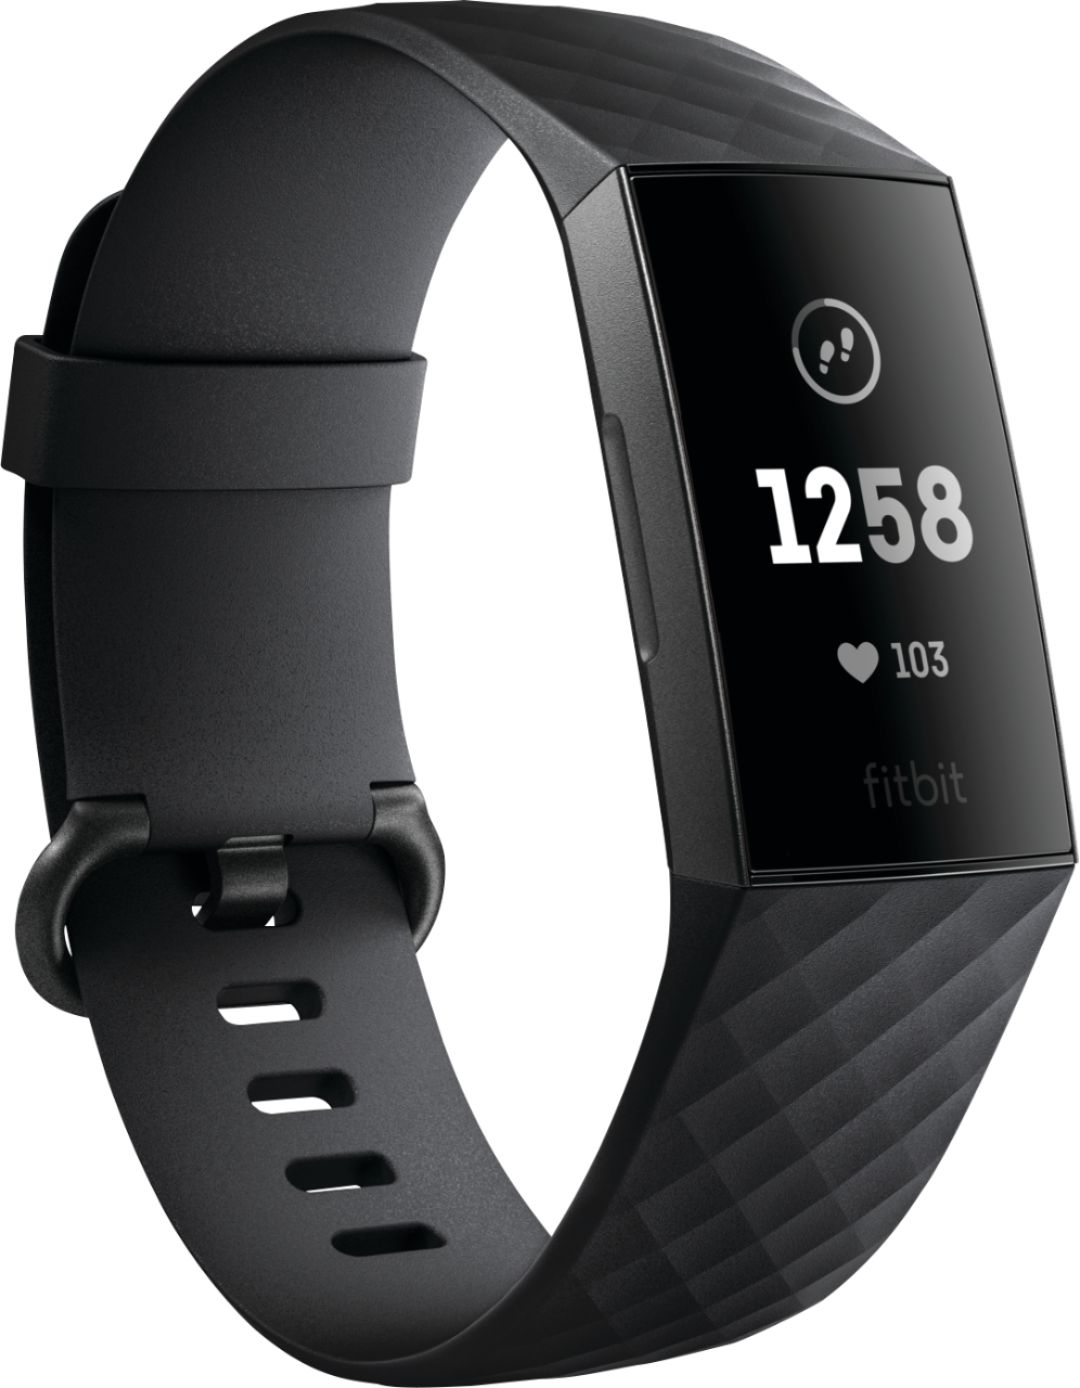 Fitbit Charge 3 Activity Tracker + 